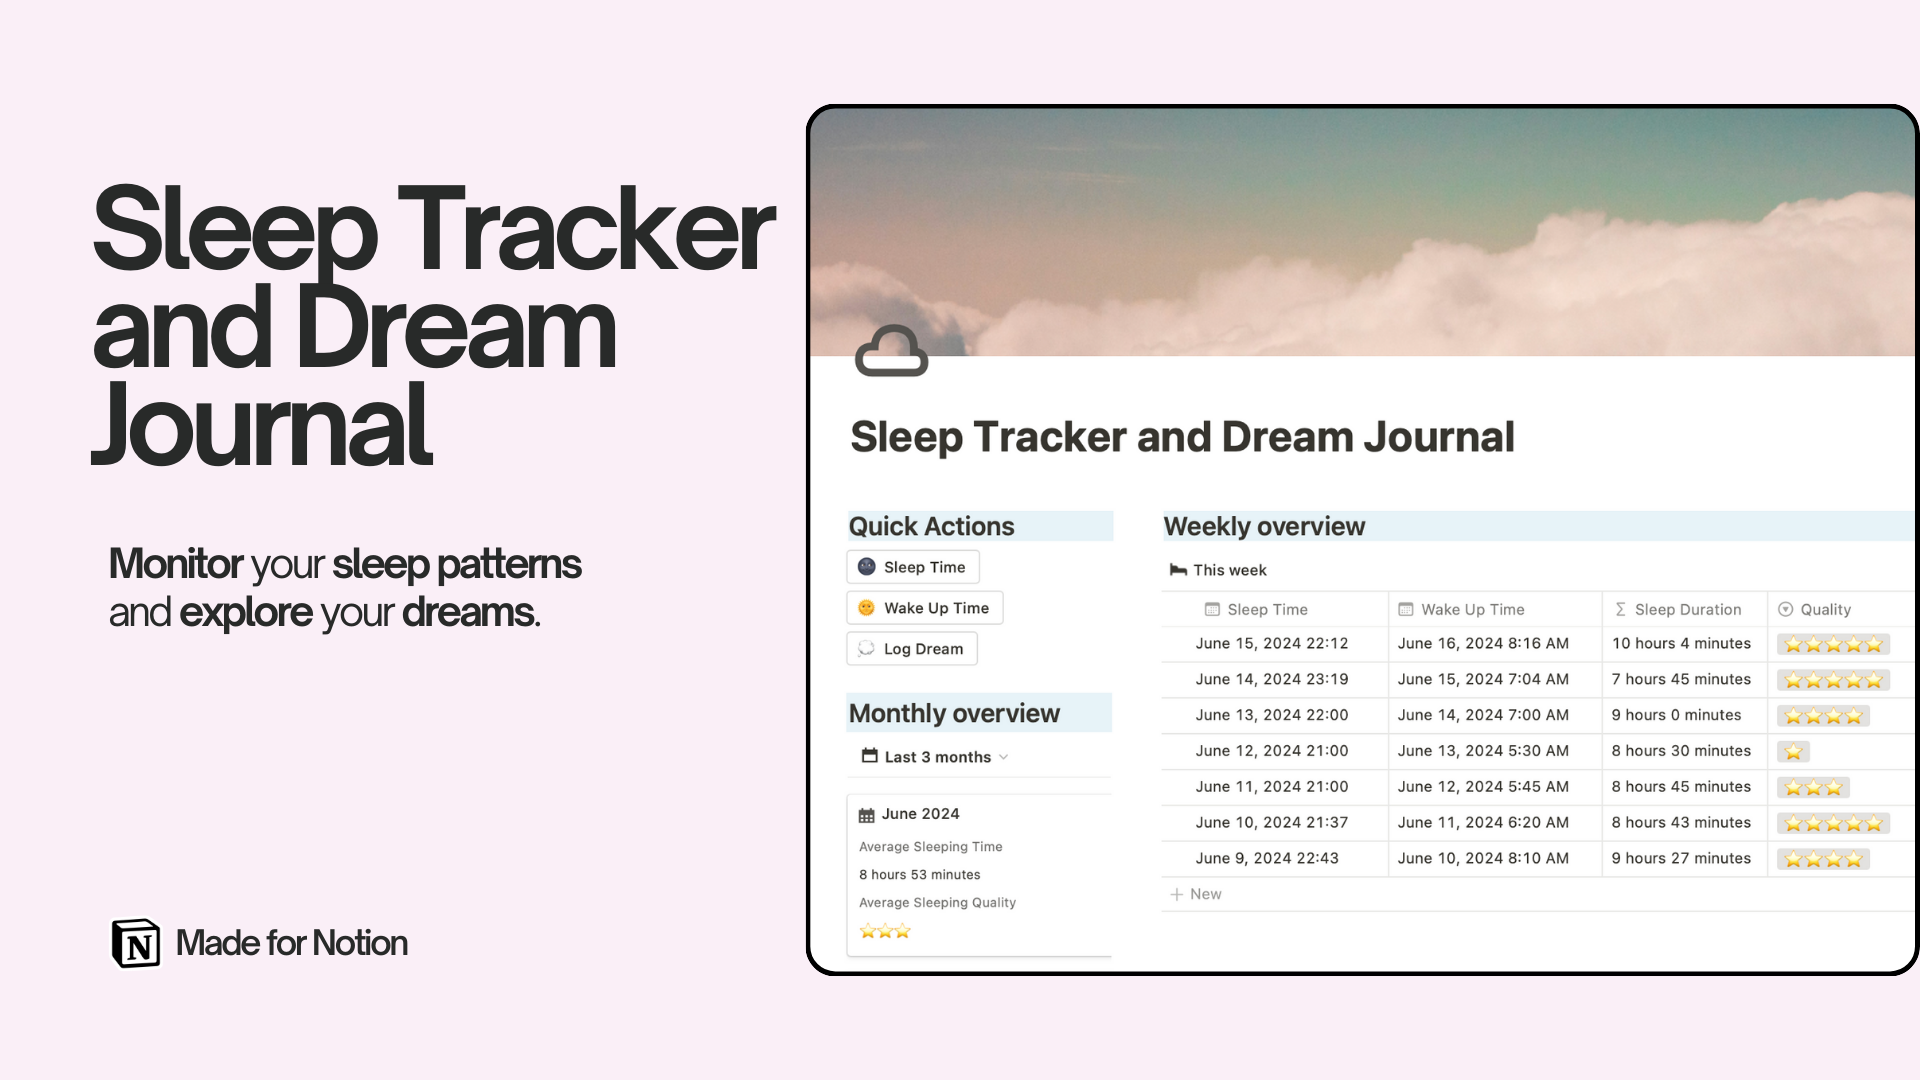 This Sleep Tracker and Dream Journal helps you monitor your sleep patterns and explore your dreams.